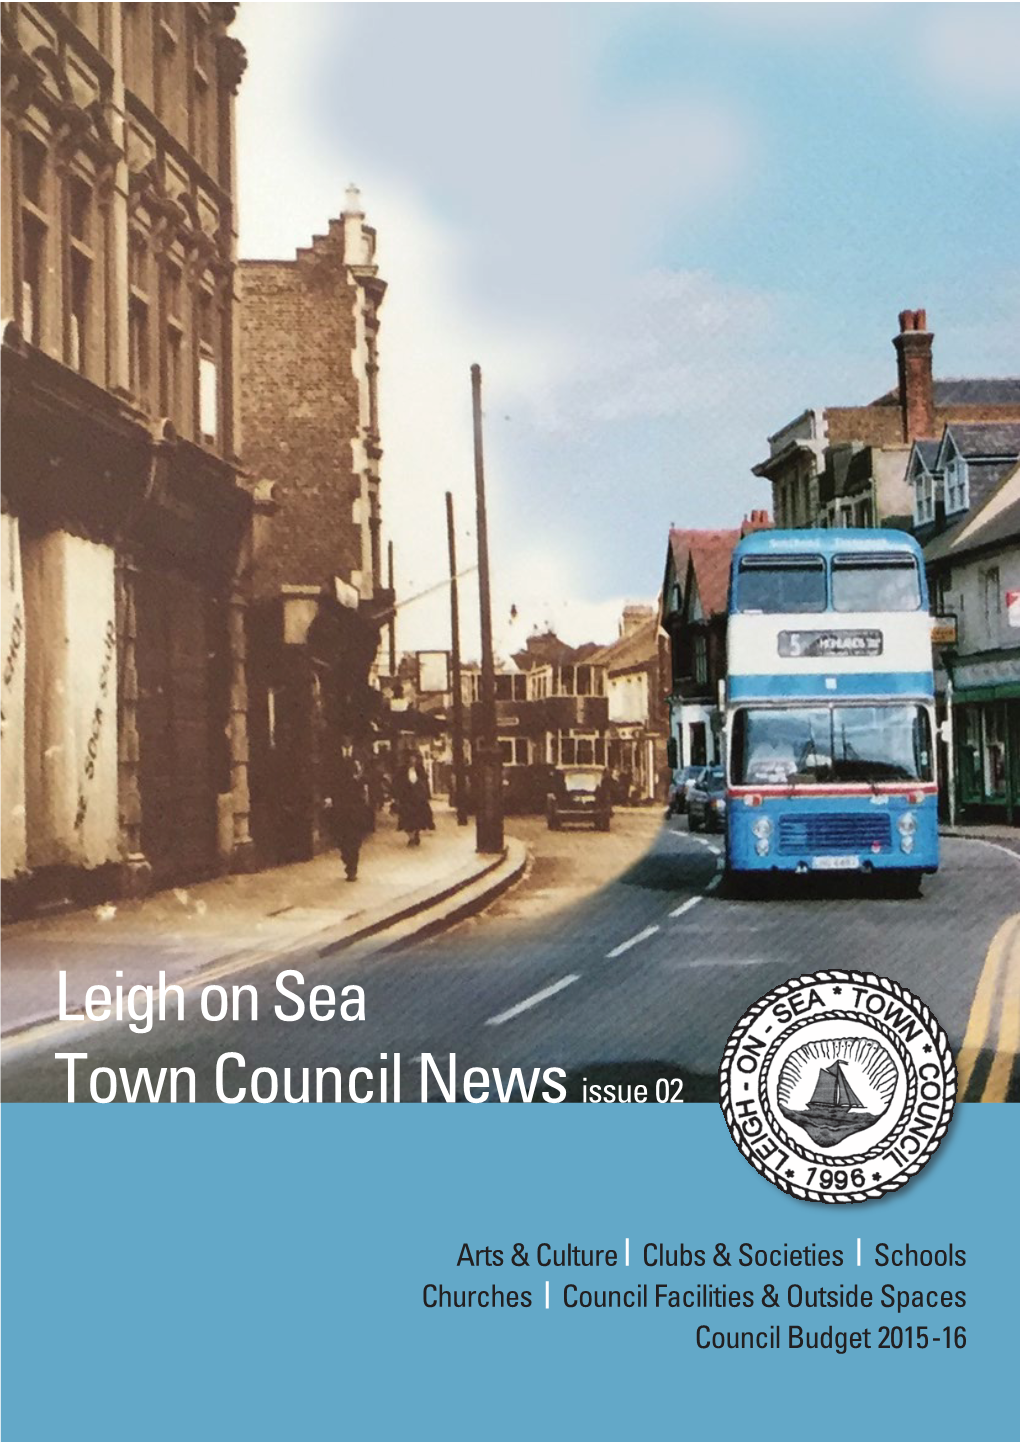 Leigh on Sea Town Council Newsissue 02